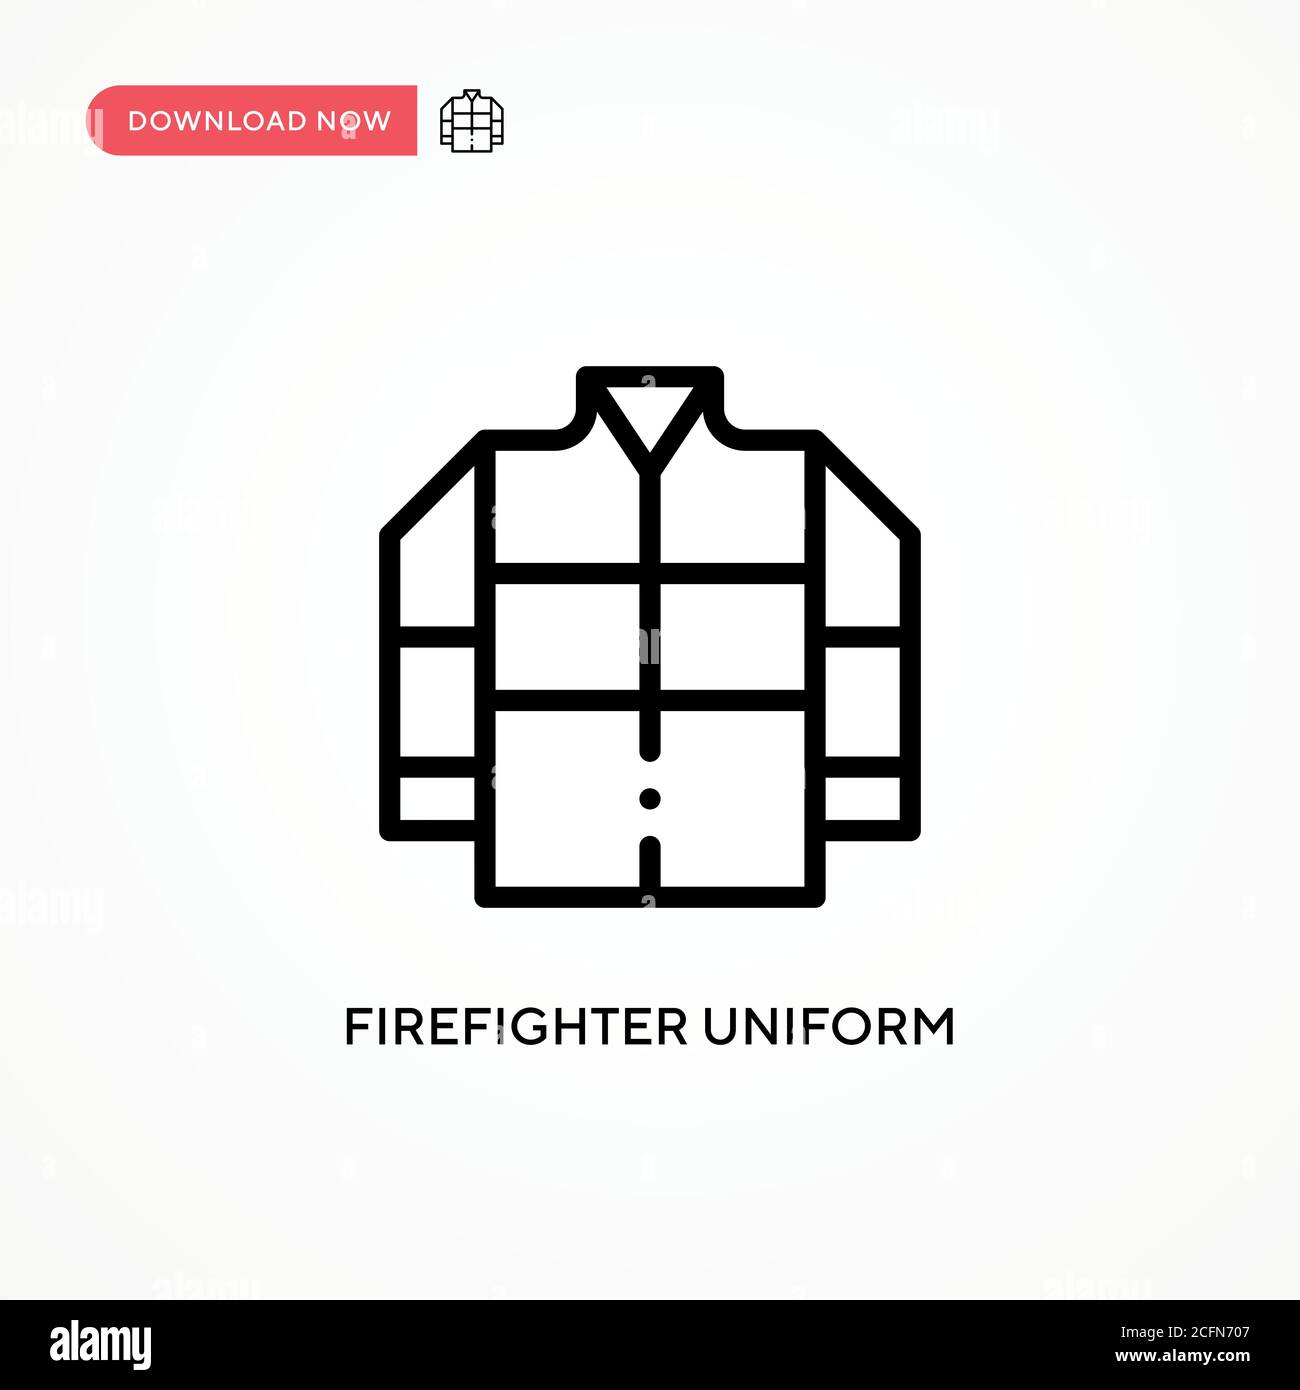 Firefighter uniform vector icon. Modern, simple flat vector illustration for web site or mobile app Stock Vector